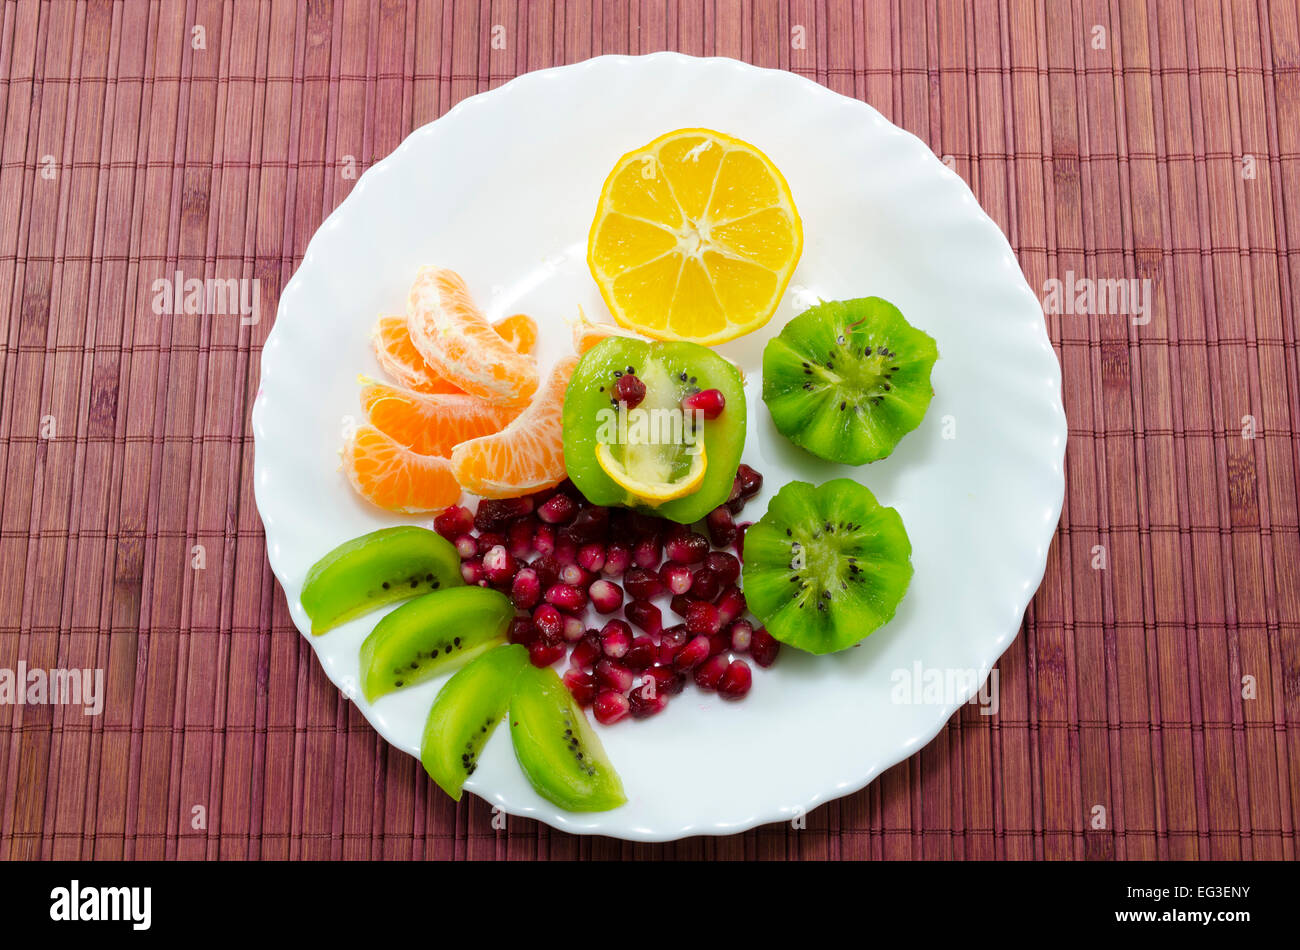 Sliced kiwi, pomegranate, oranges and lemon on a white plate, placed on a bamboo tablecloth Stock Photo